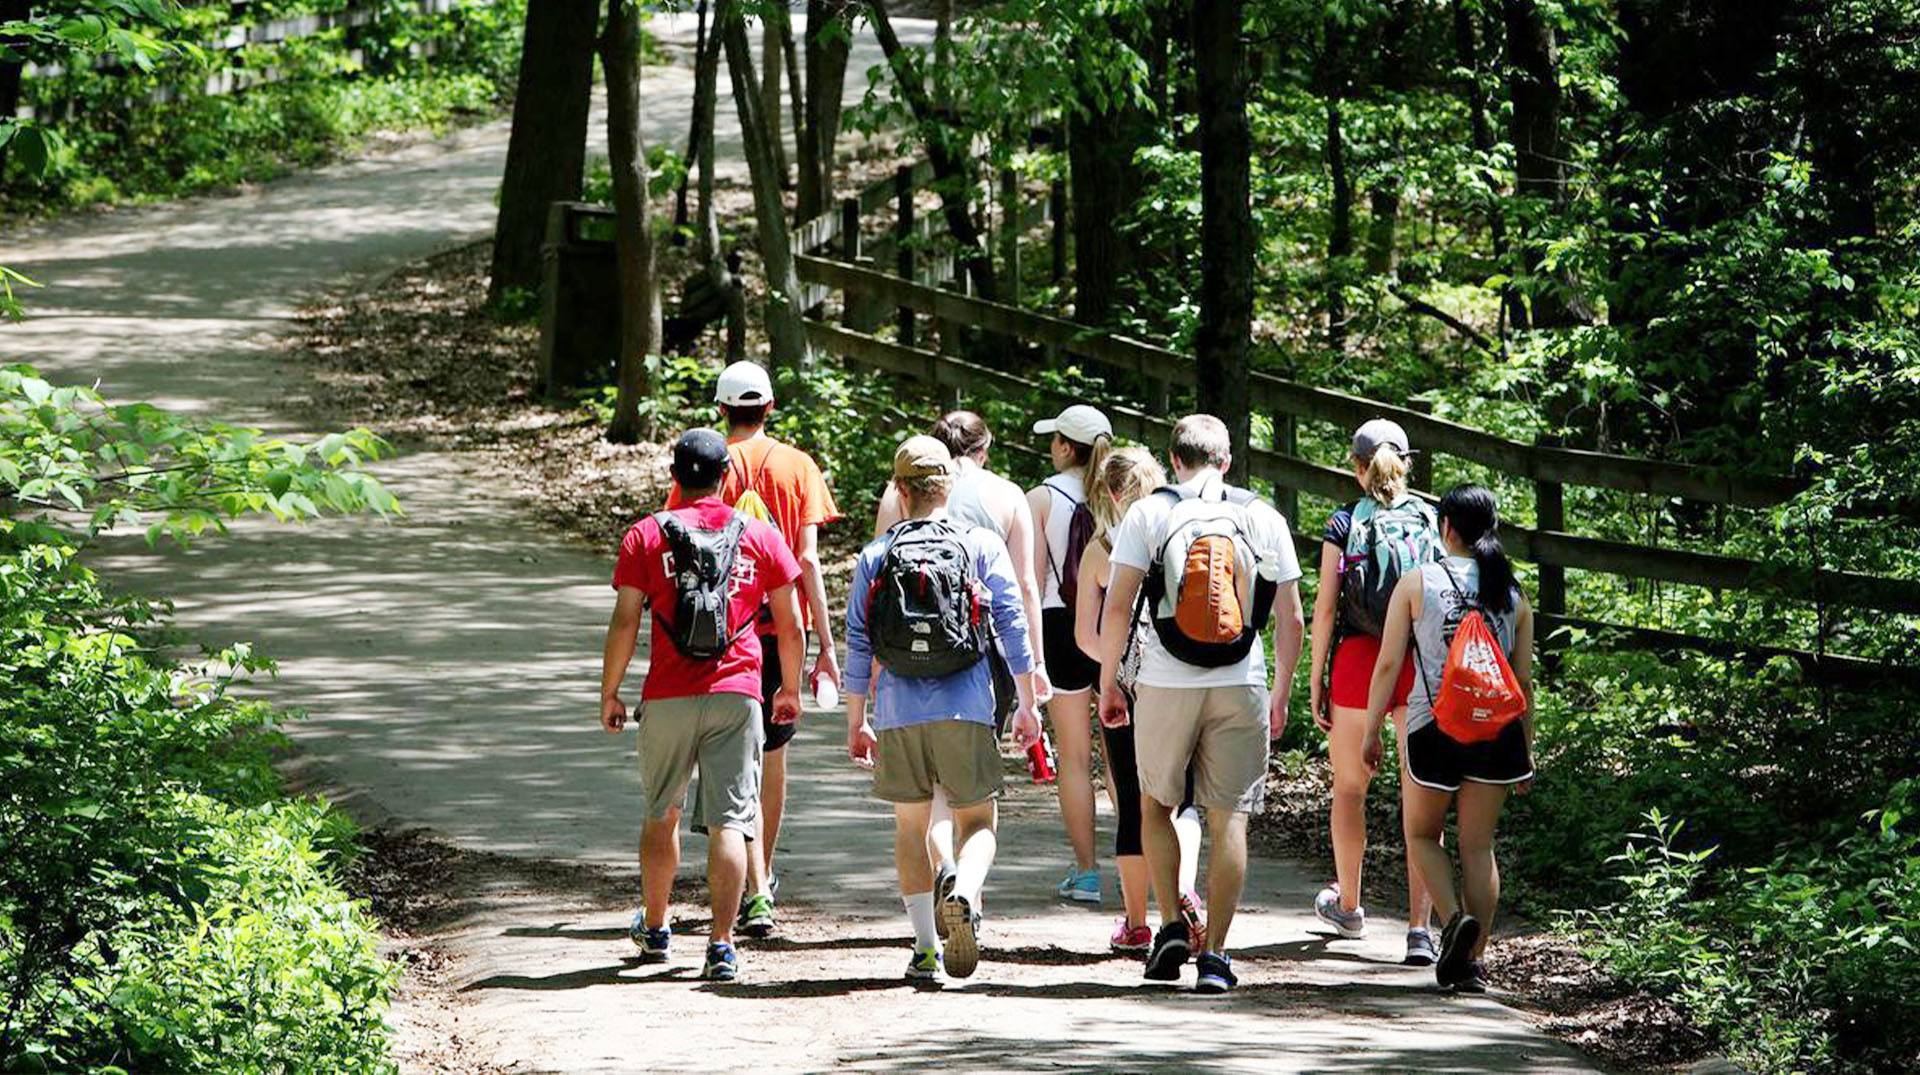 A group of people walking on the trail